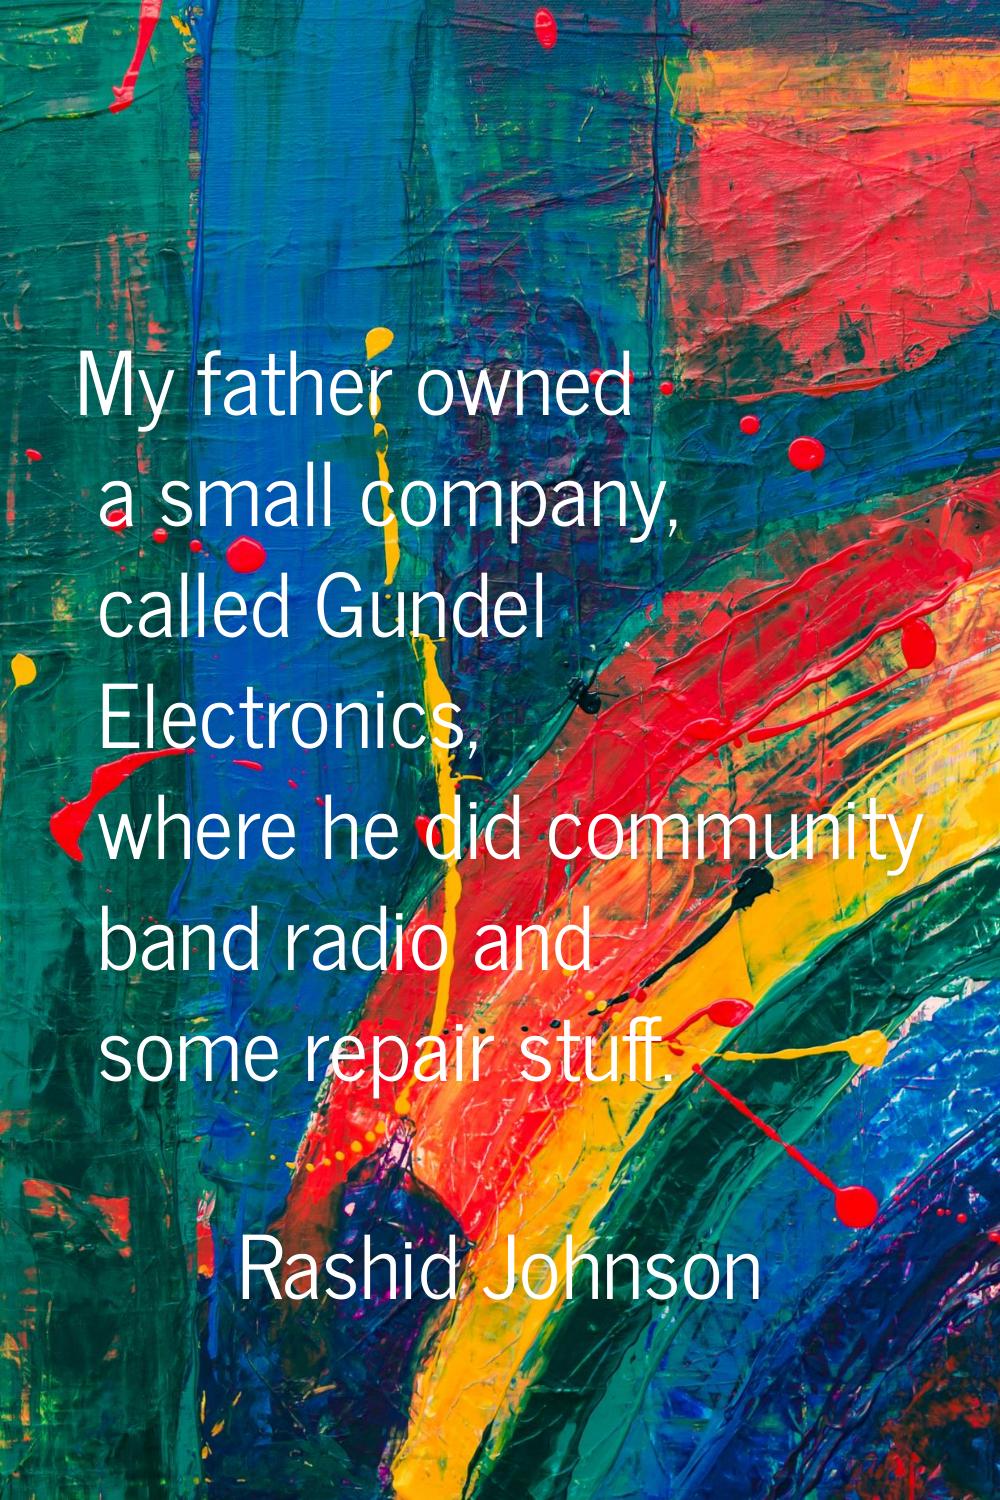 My father owned a small company, called Gundel Electronics, where he did community band radio and s